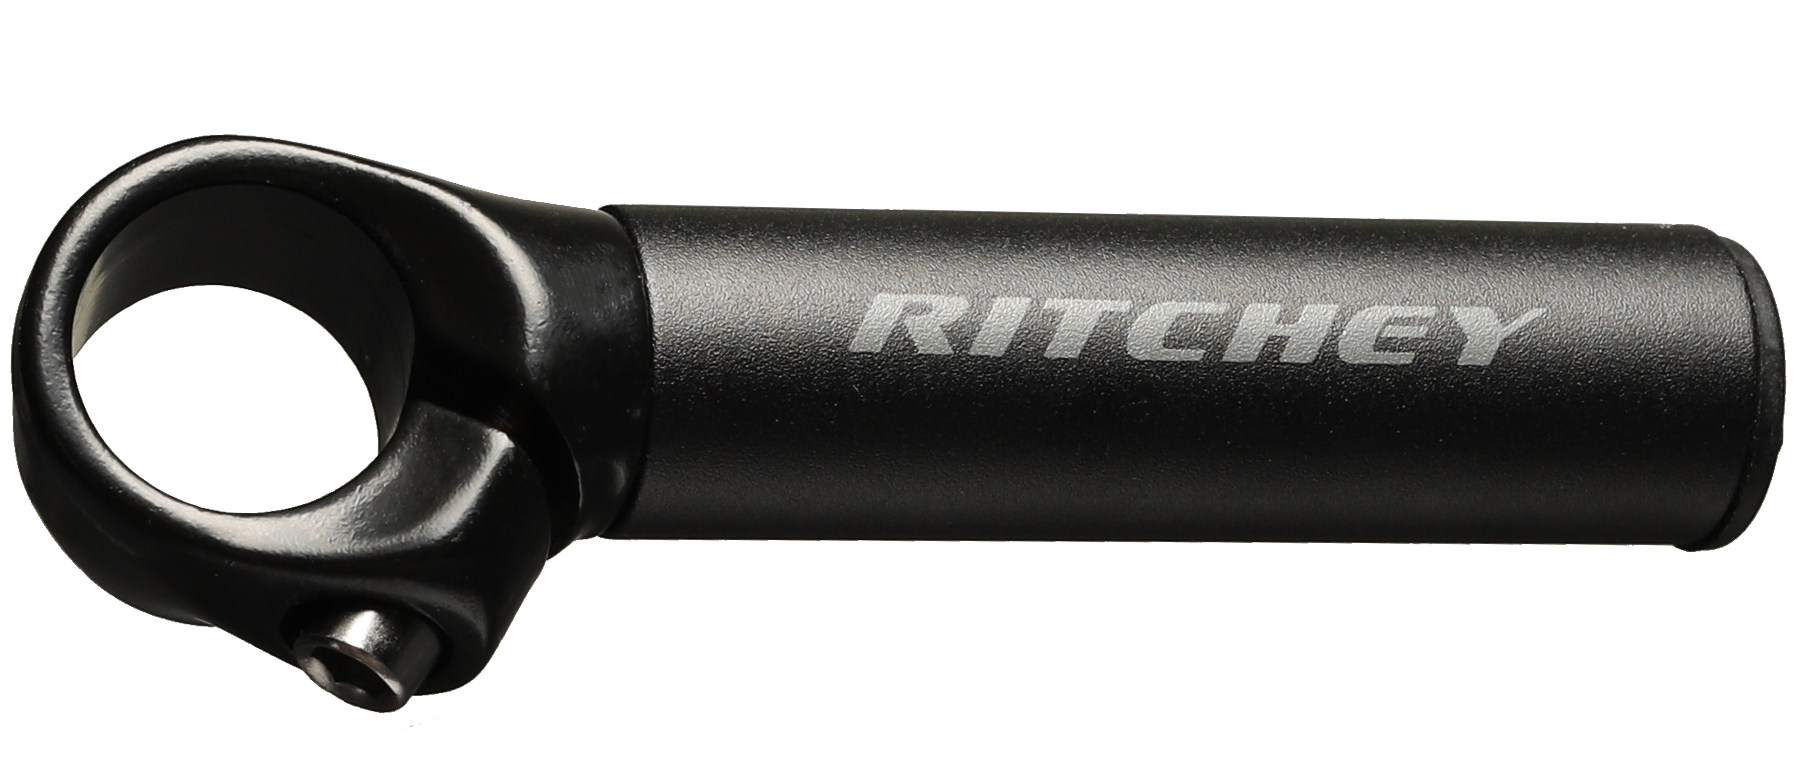 Ritchey Comp Bar Ends